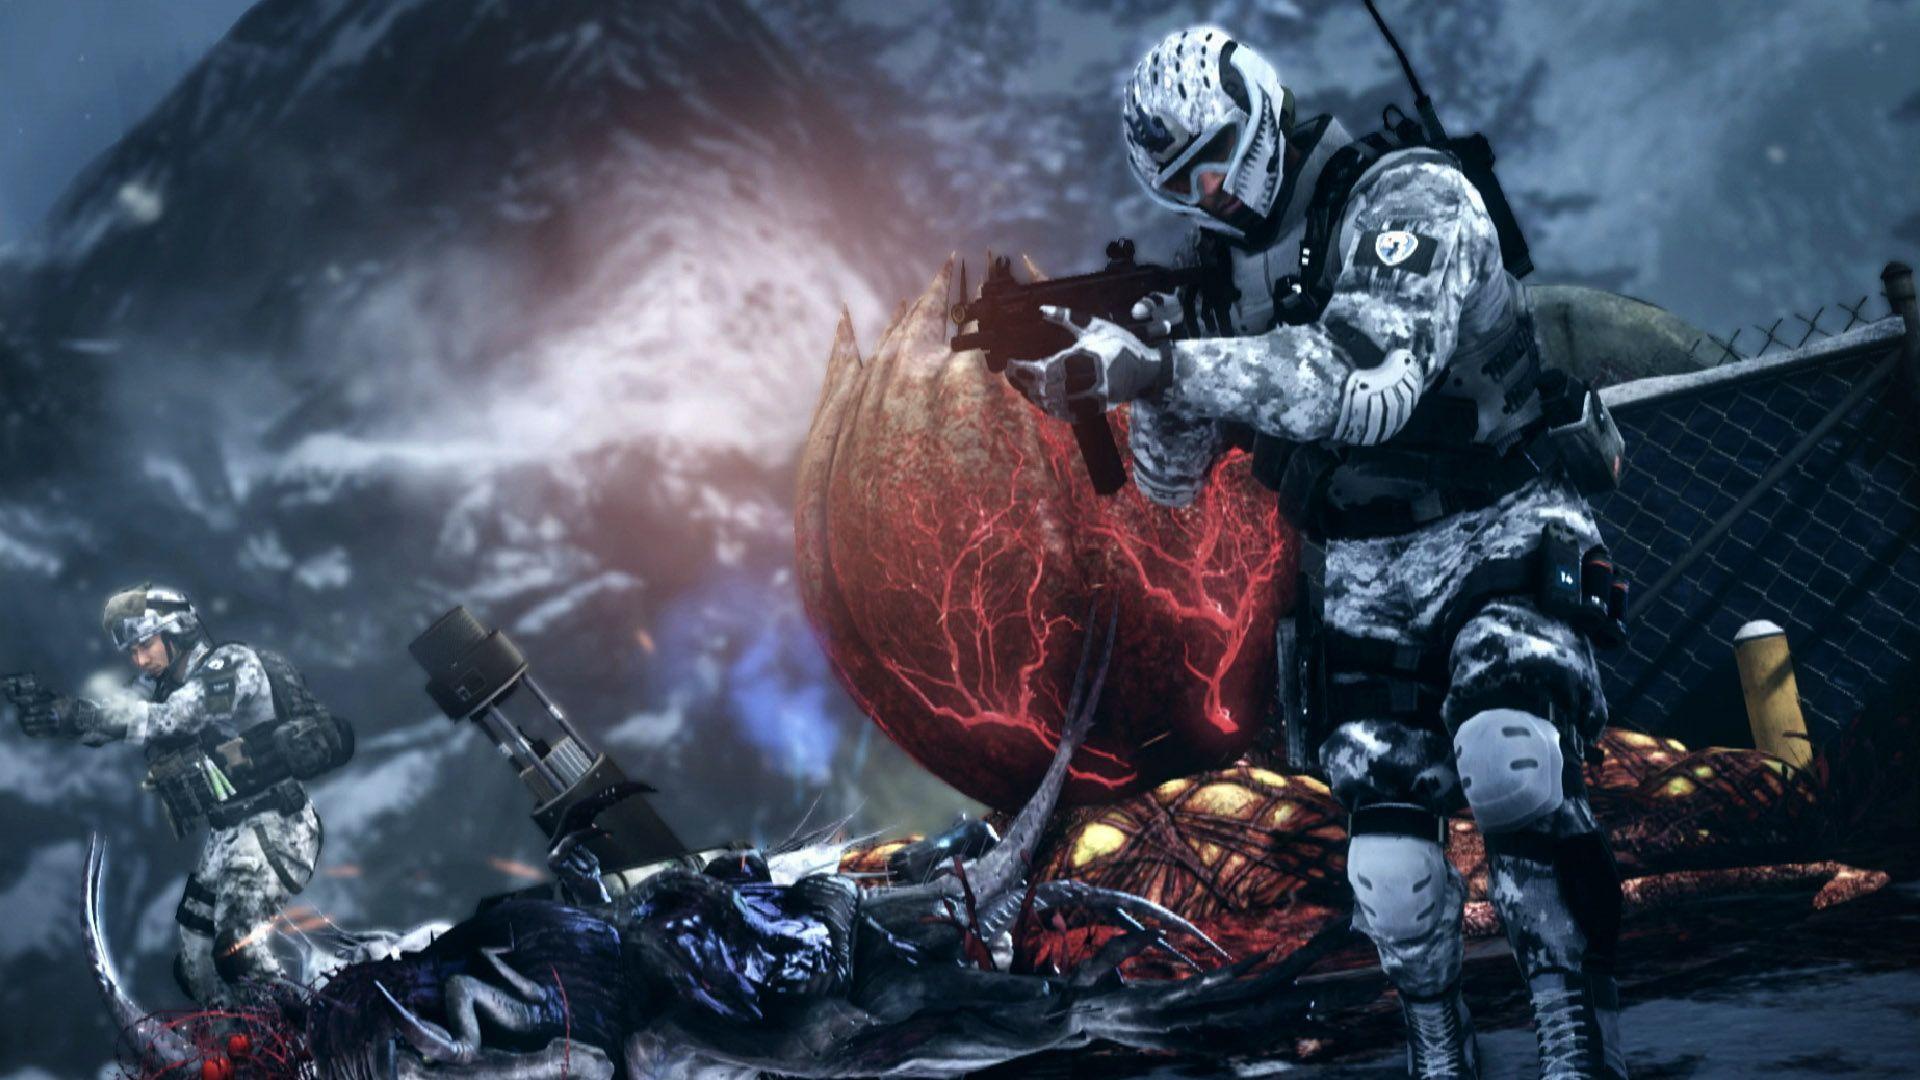 Call Of Duty 2016 Release: Should Infinity Ward Develop Ghosts 2?